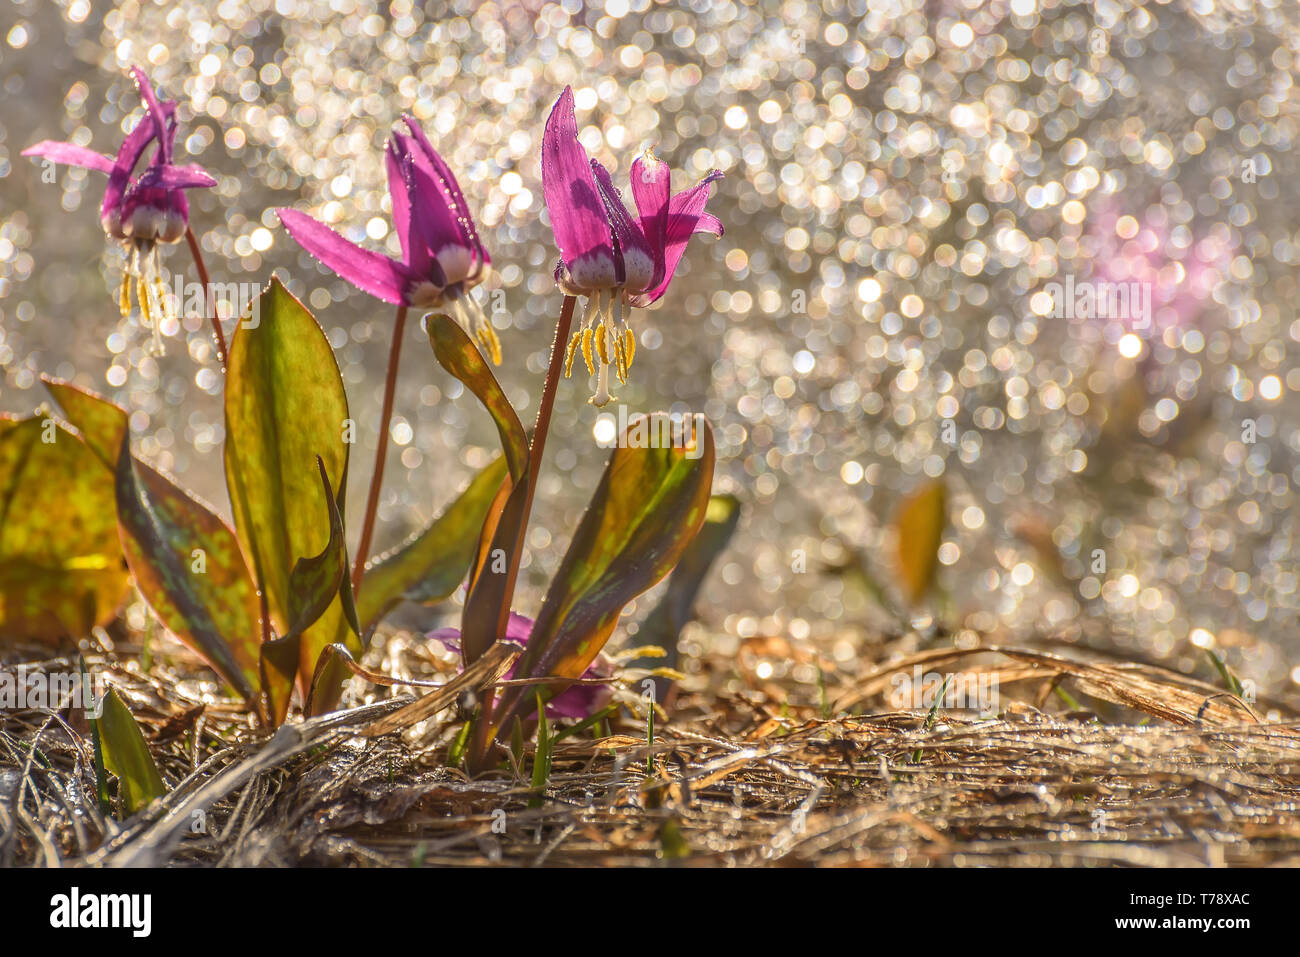 Amazing floral background with the first spring burgundy wild flowers of Erythronium sibiricum with rain drops in the meadow close-up with sun glare Stock Photo